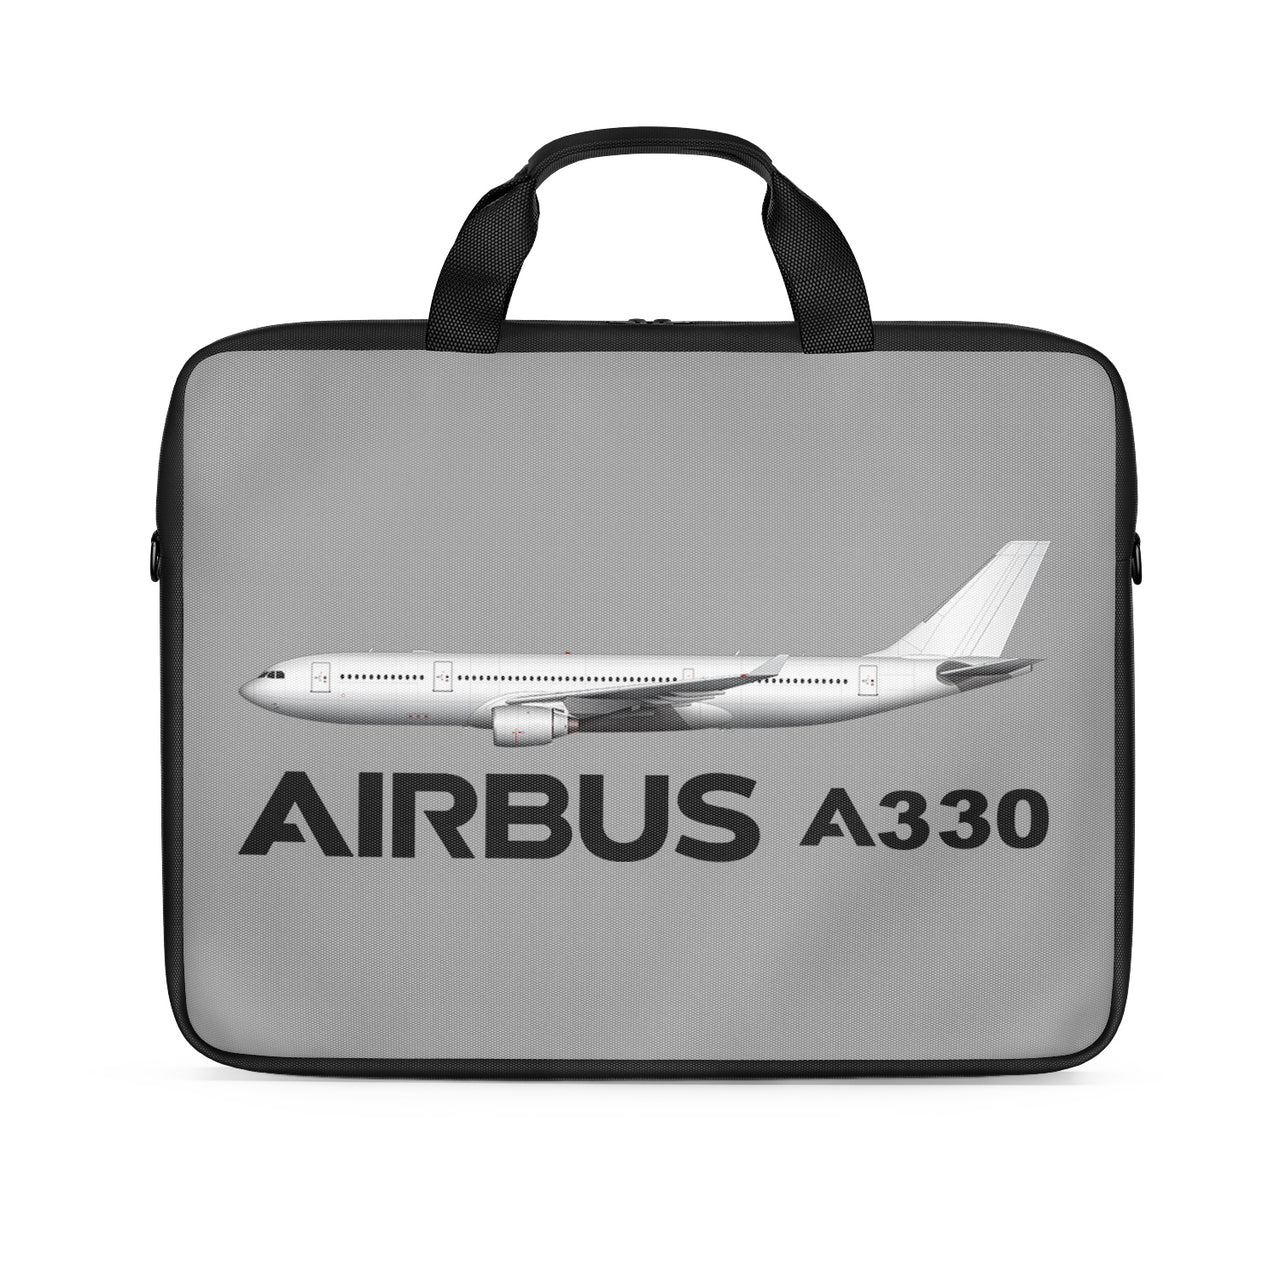 The Airbus A330 Designed Laptop & Tablet Bags